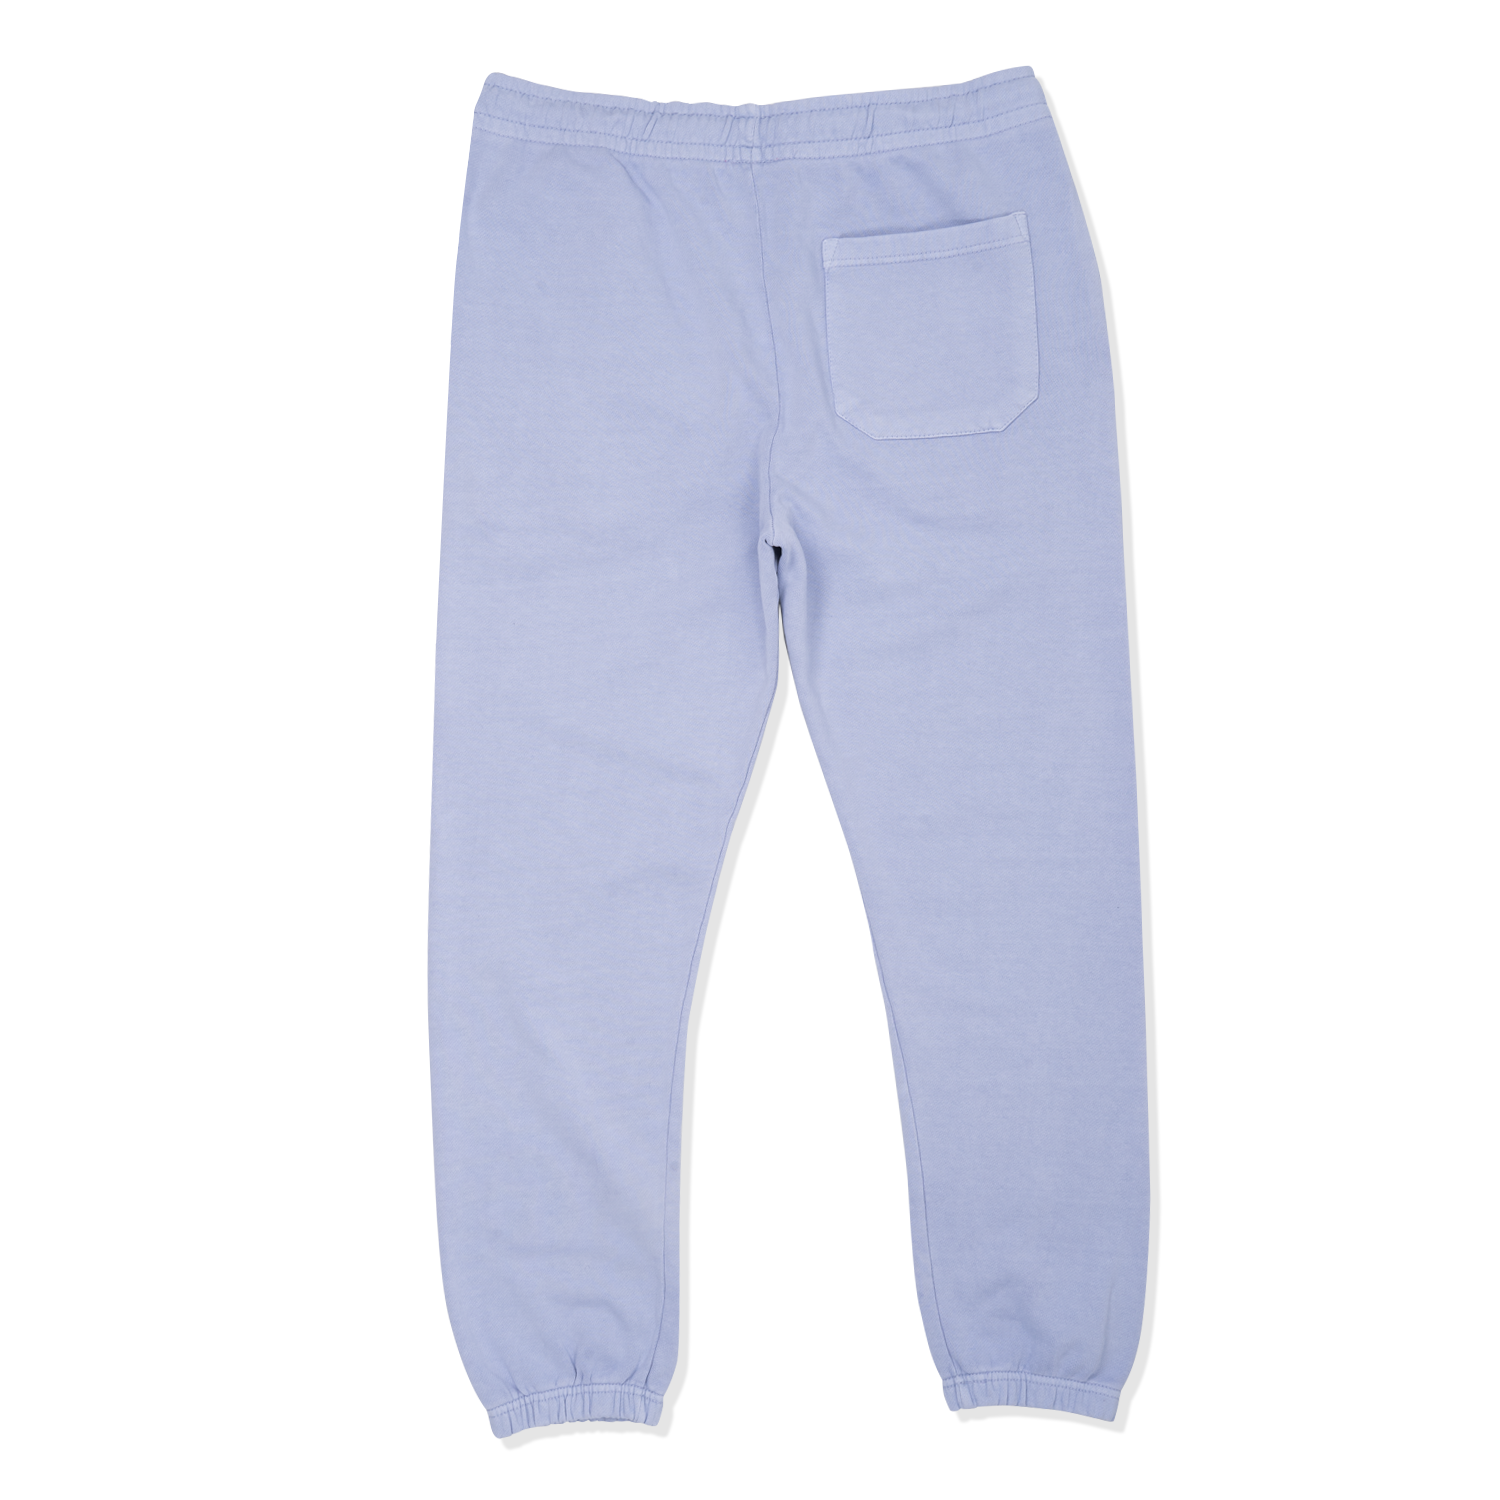 Ayylien Made in Space Joggers - Light Blue